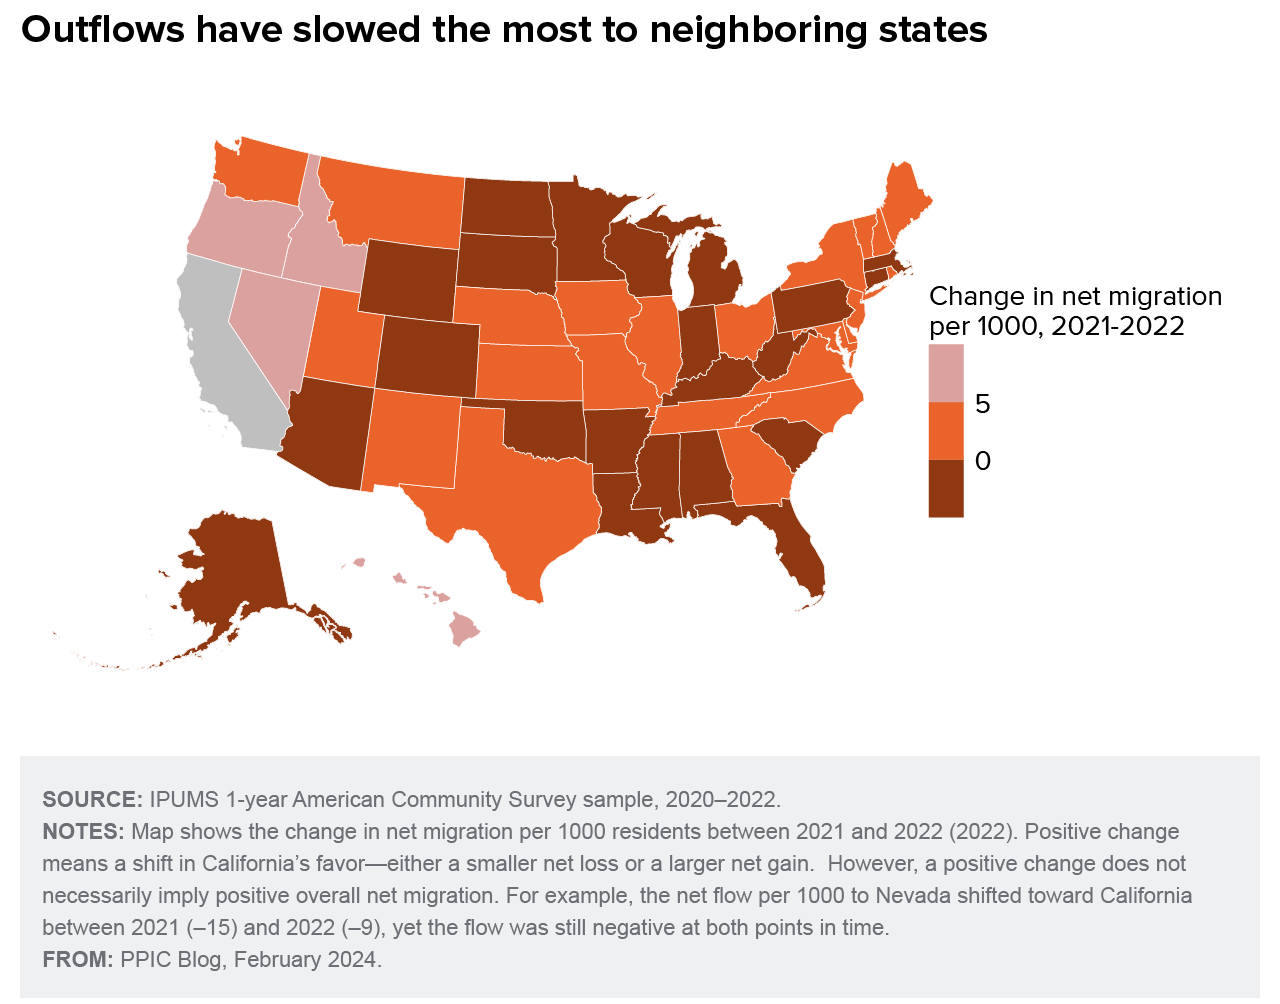 figure - Outflows have slowed the most to neighboring states